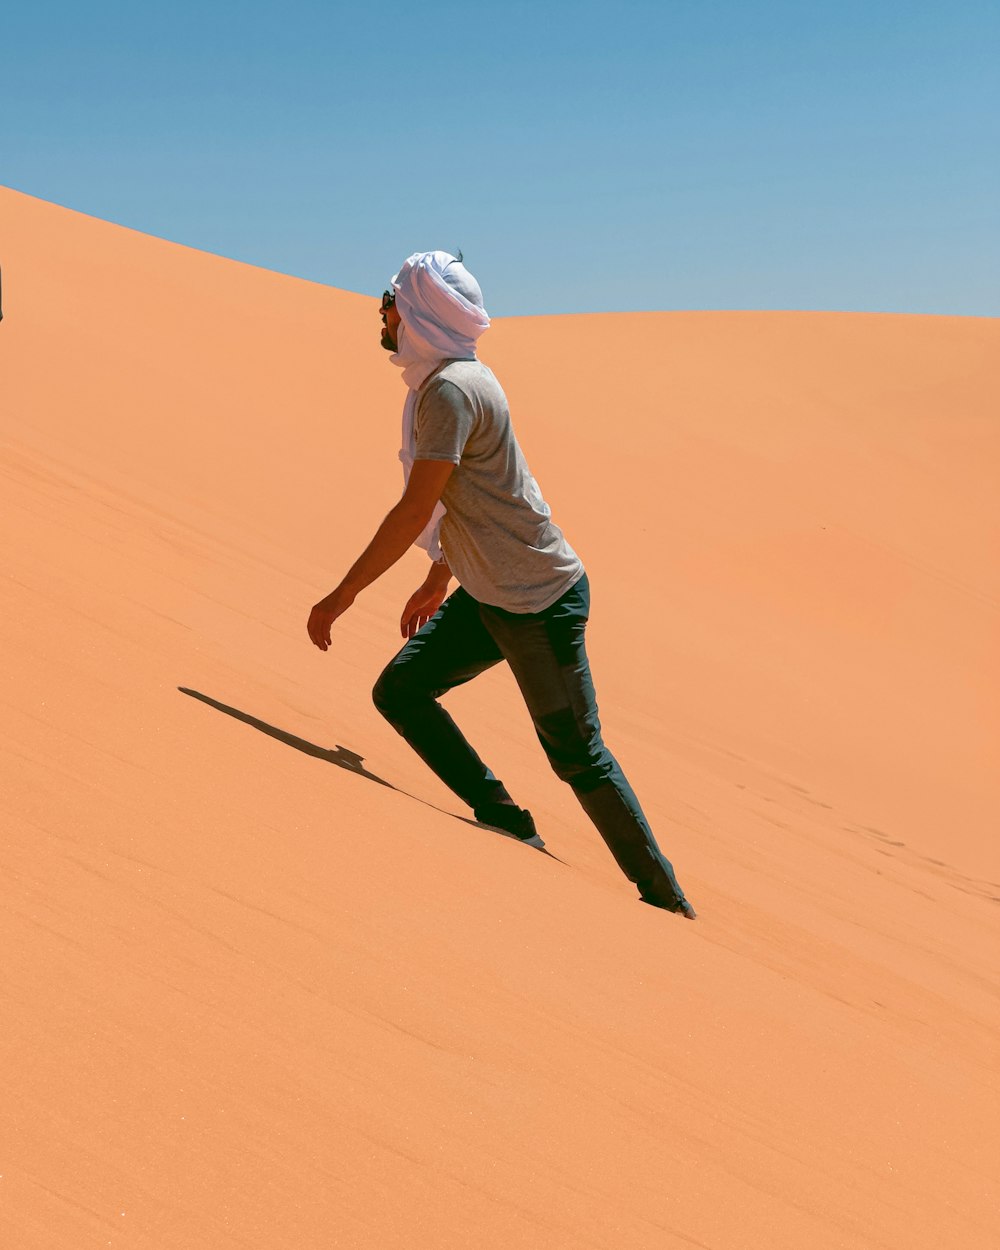 a man riding a skateboard down the side of a sand dune